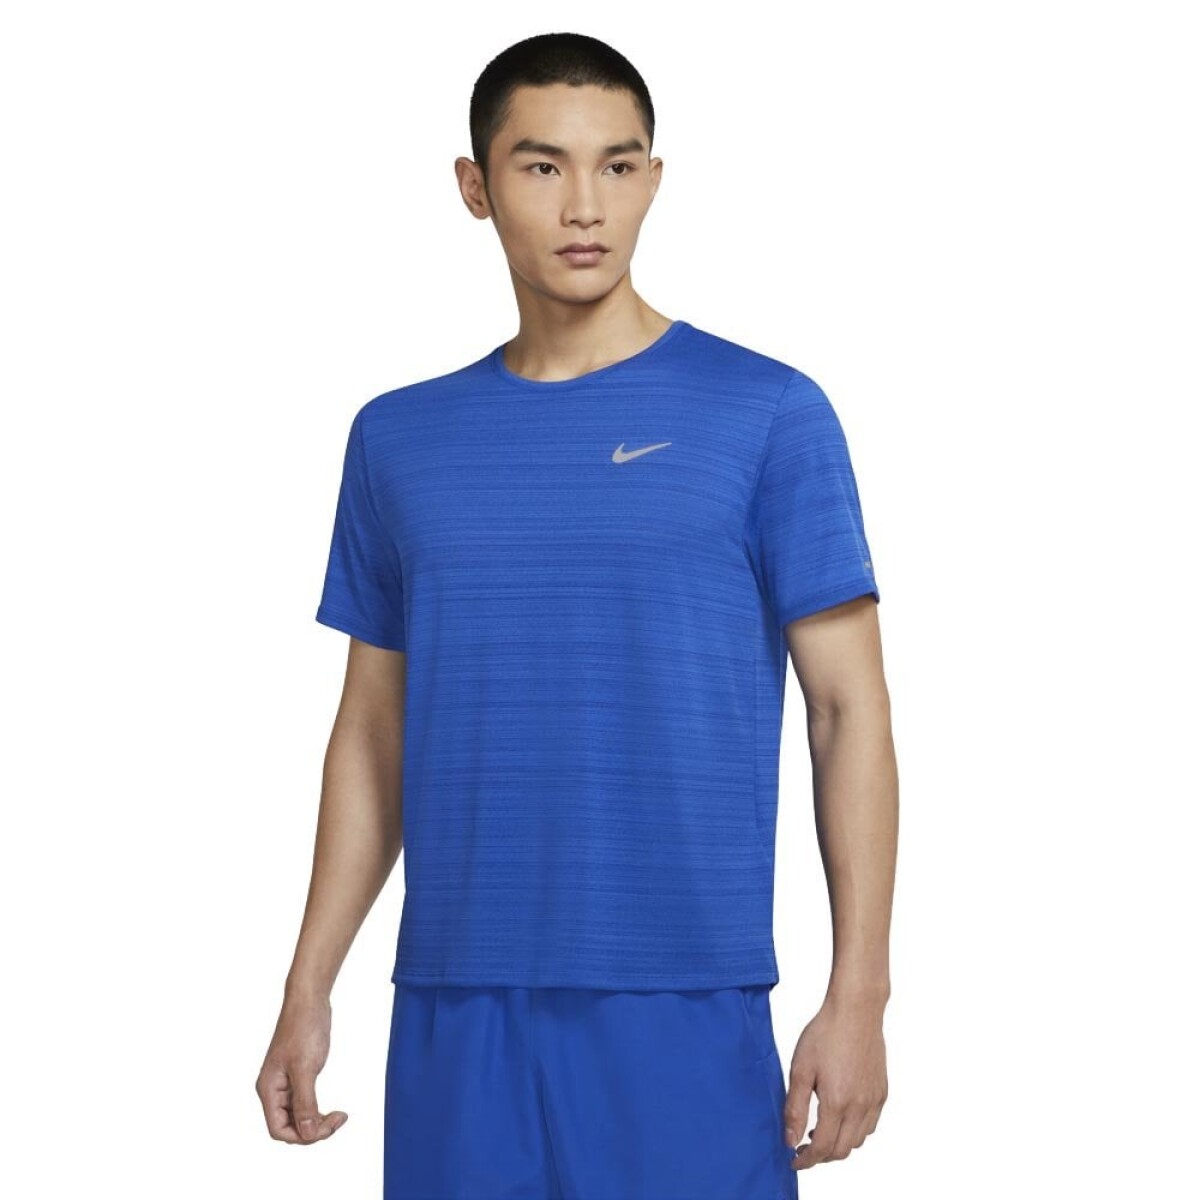 Remera Nike Running Hombre Df Miler Top SS Game - S/C 